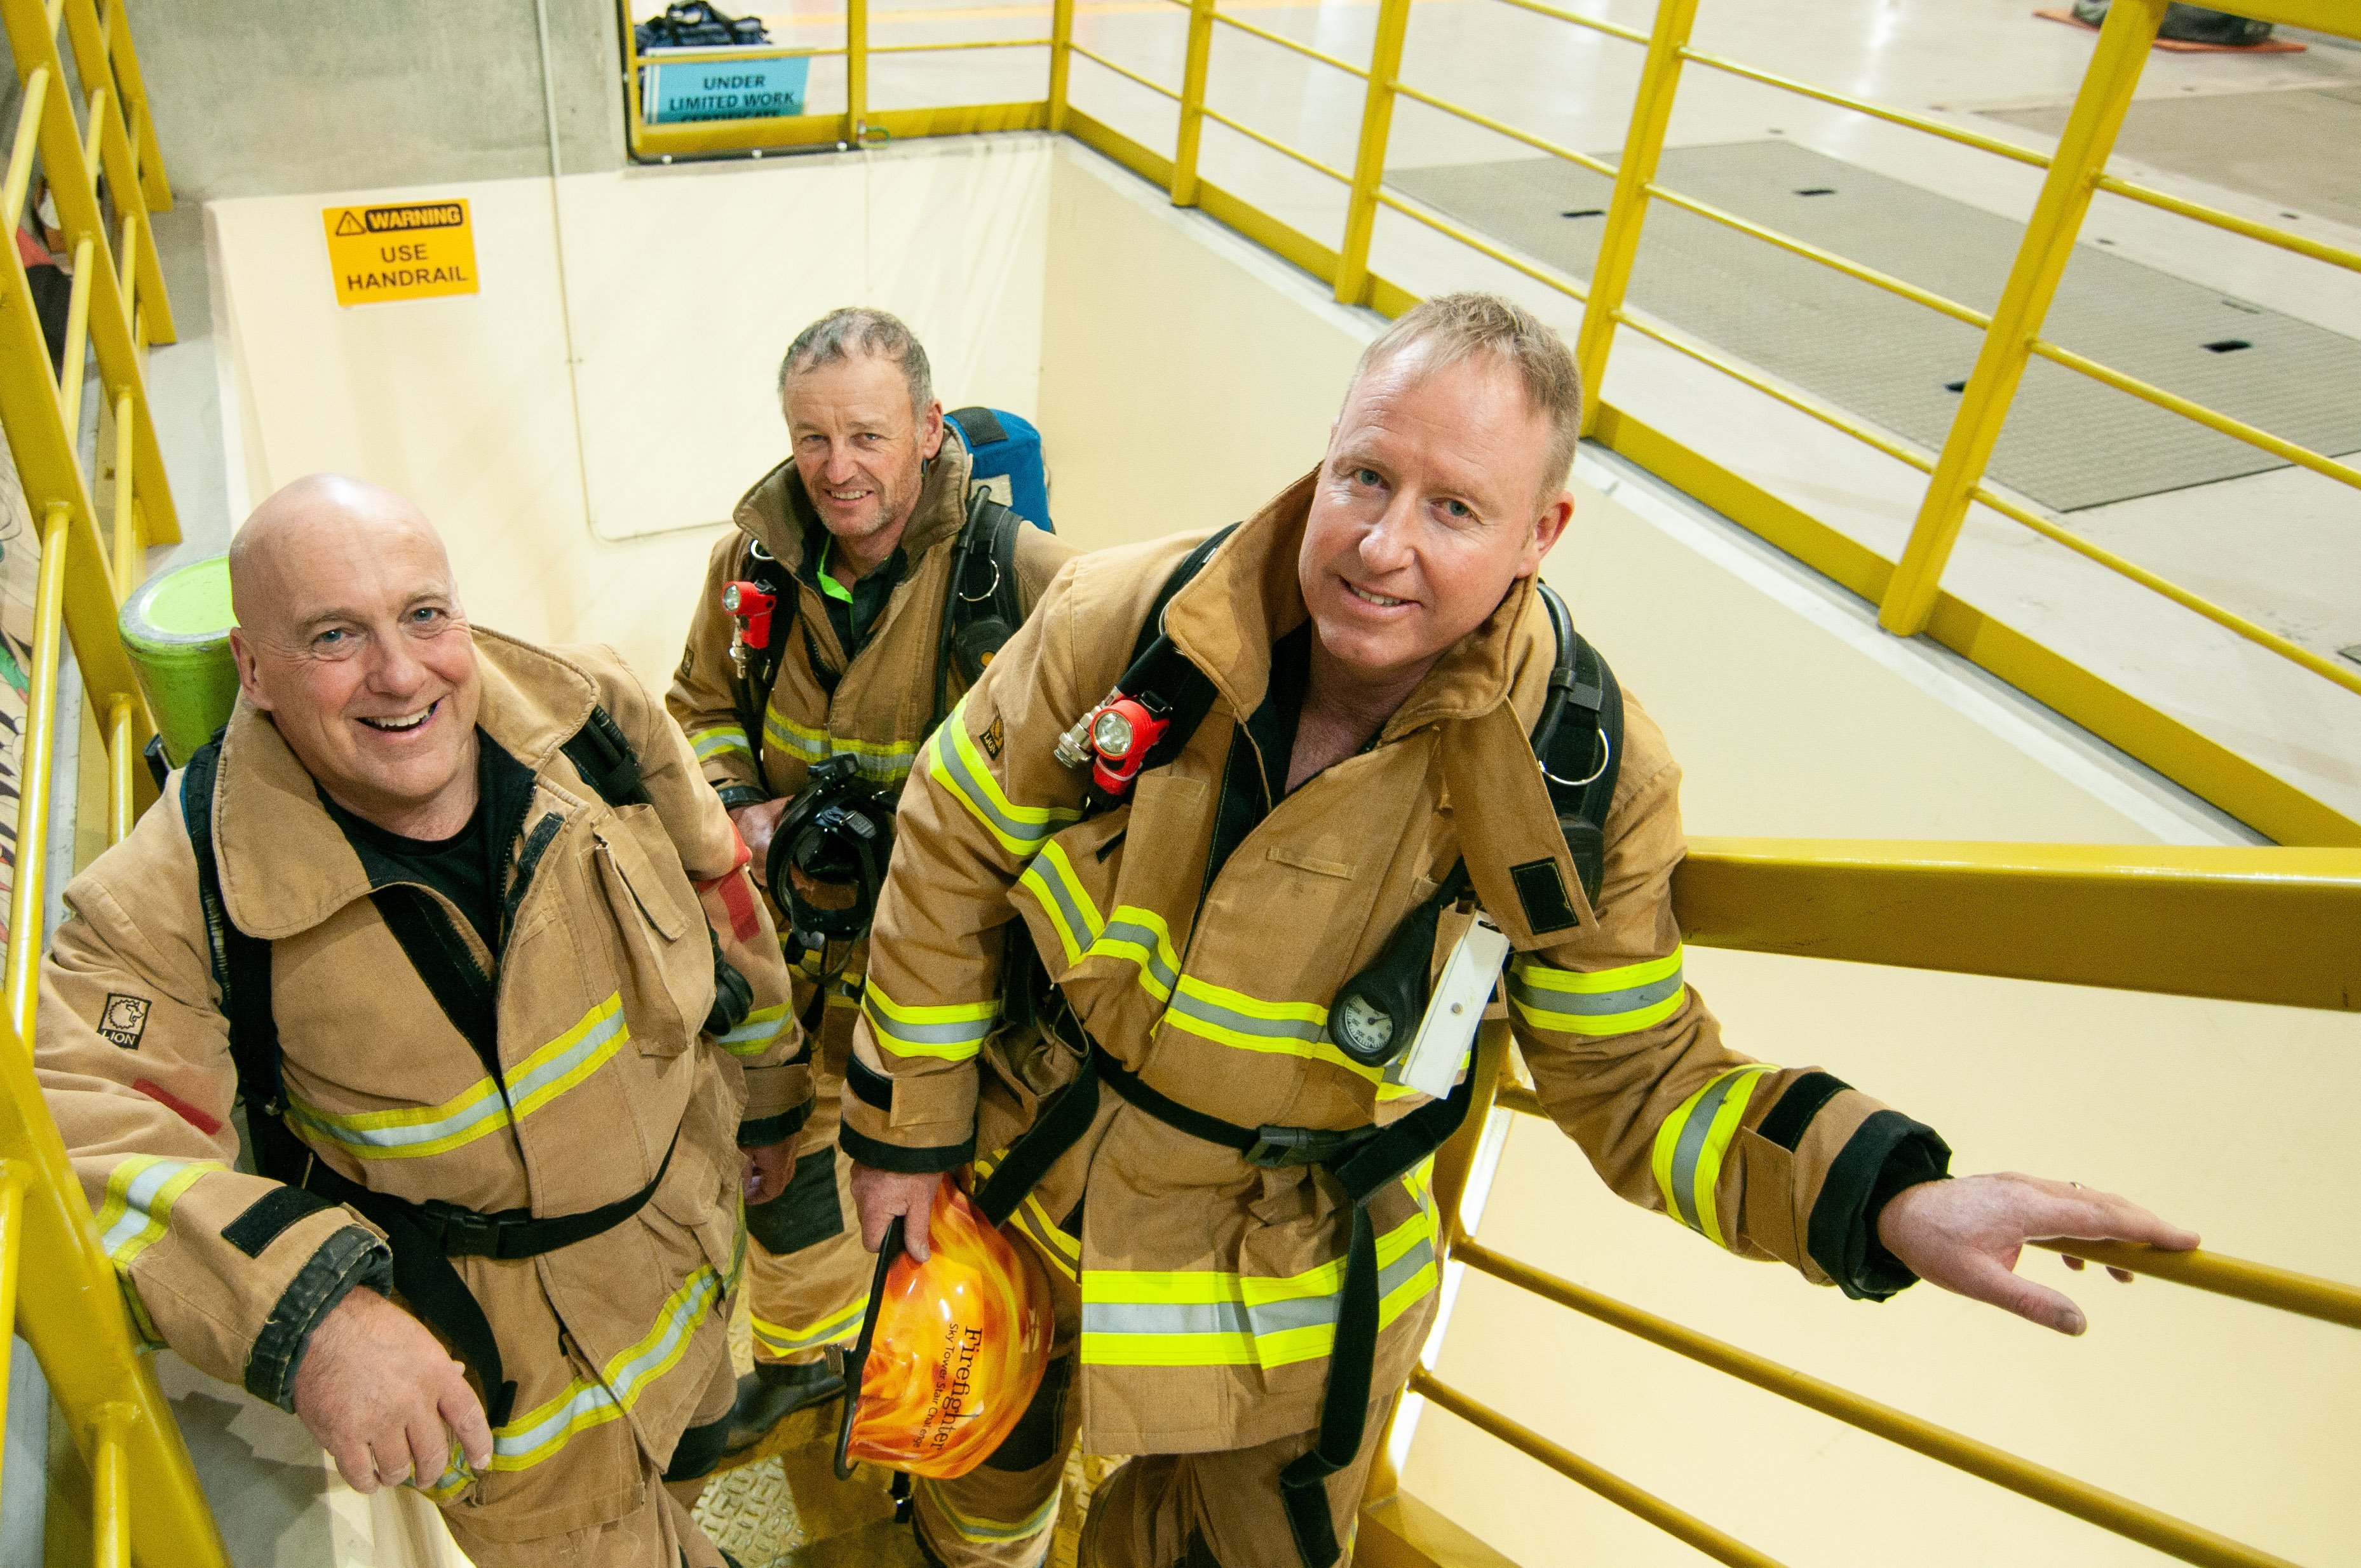 Training at the Clyde Dam for the annual Firefighter Sky Tower Challenge are (from left) Central...